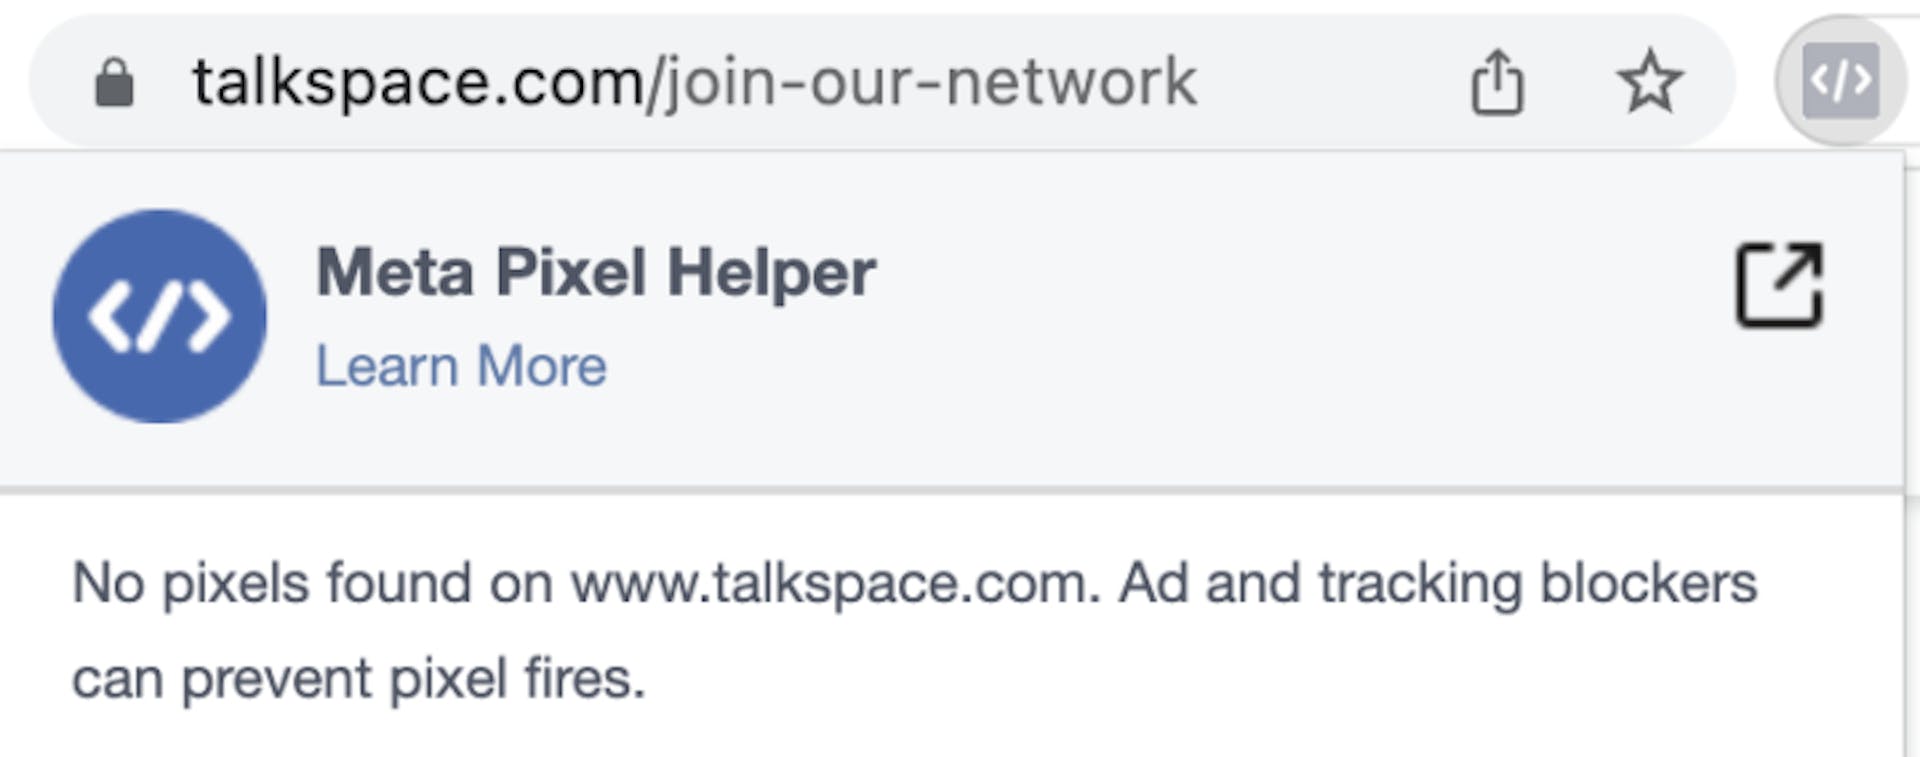 Browser extension shows the Meta Pixel is not present on the talkspace.com “join our network” of therapists page. Source: Meta Pixel Helper/talkspace.com